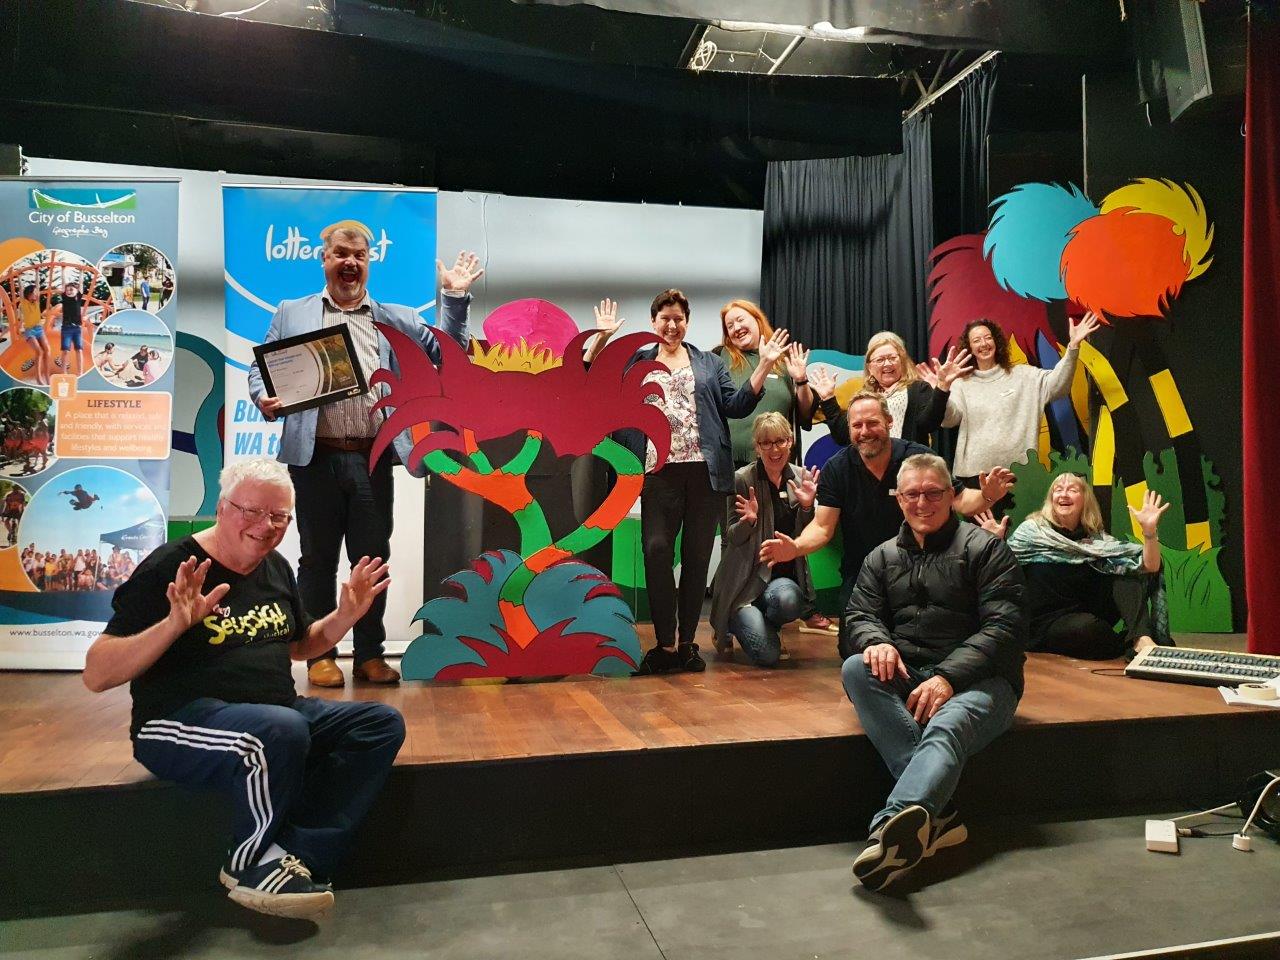 Group of people on a stage celebrating, surrounded by colourful props.